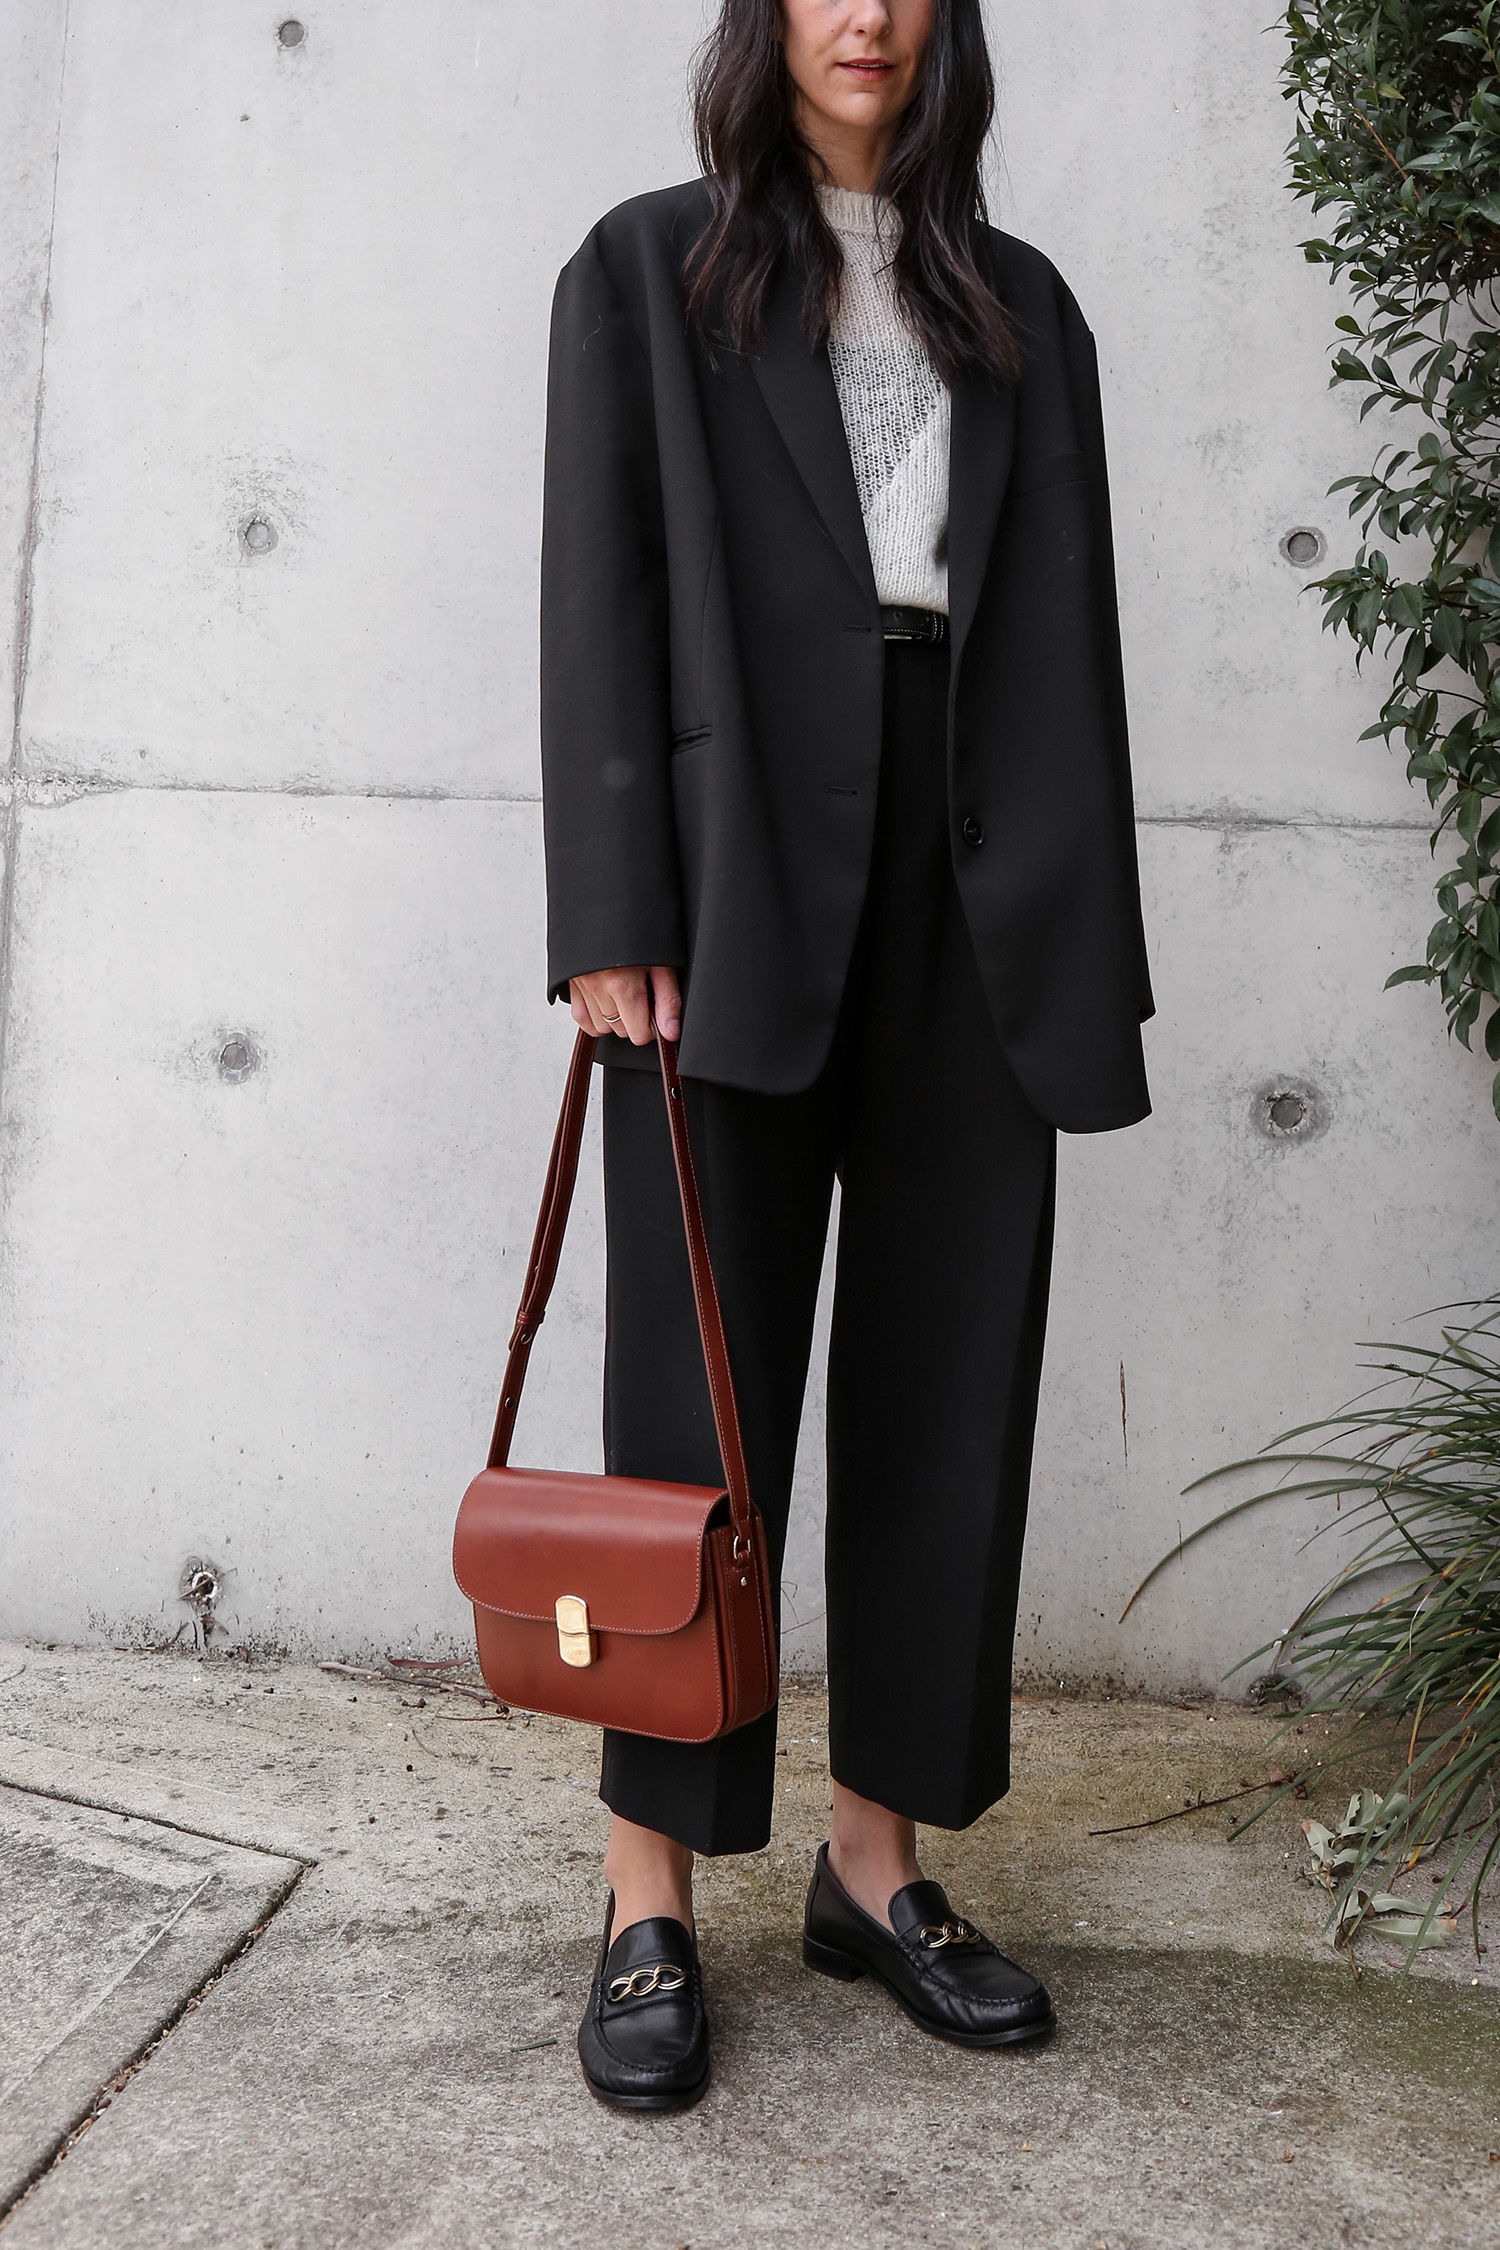 Parisian chic minimal outfit with loafers